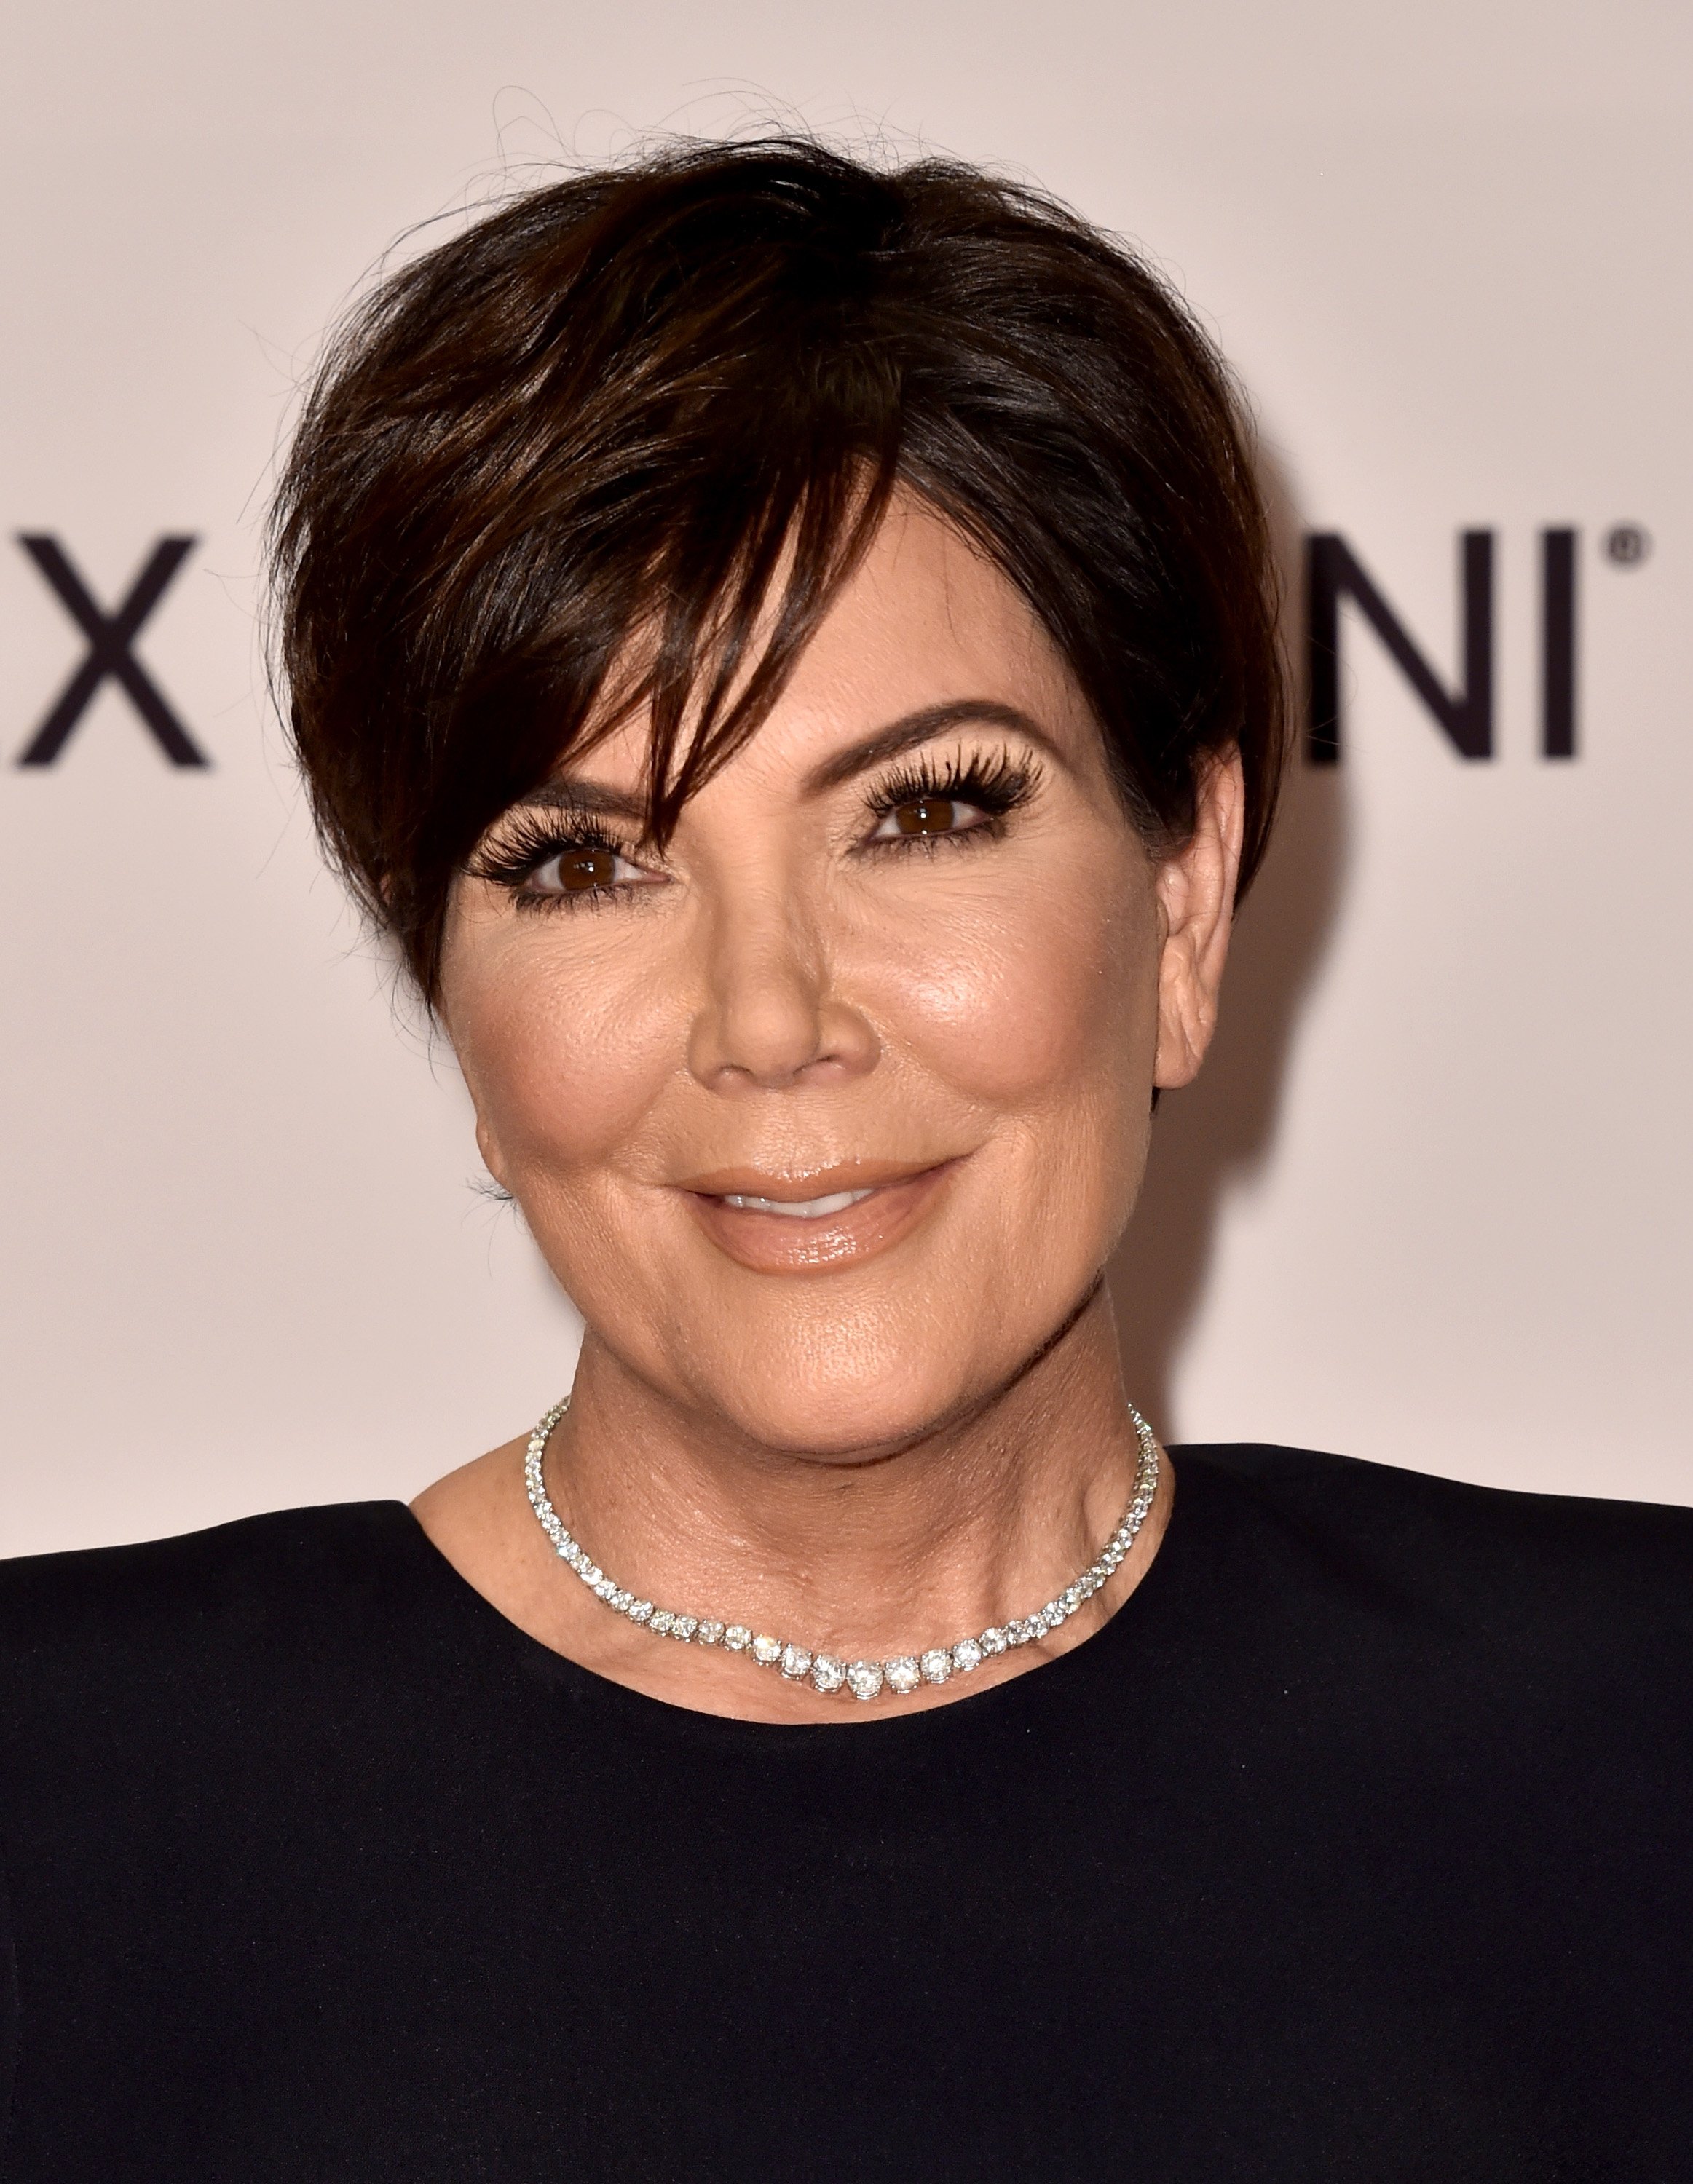 Kris Jenner at the 24th Annual Race To Erase MS Gala in May 2017. | Photo: Getty Images